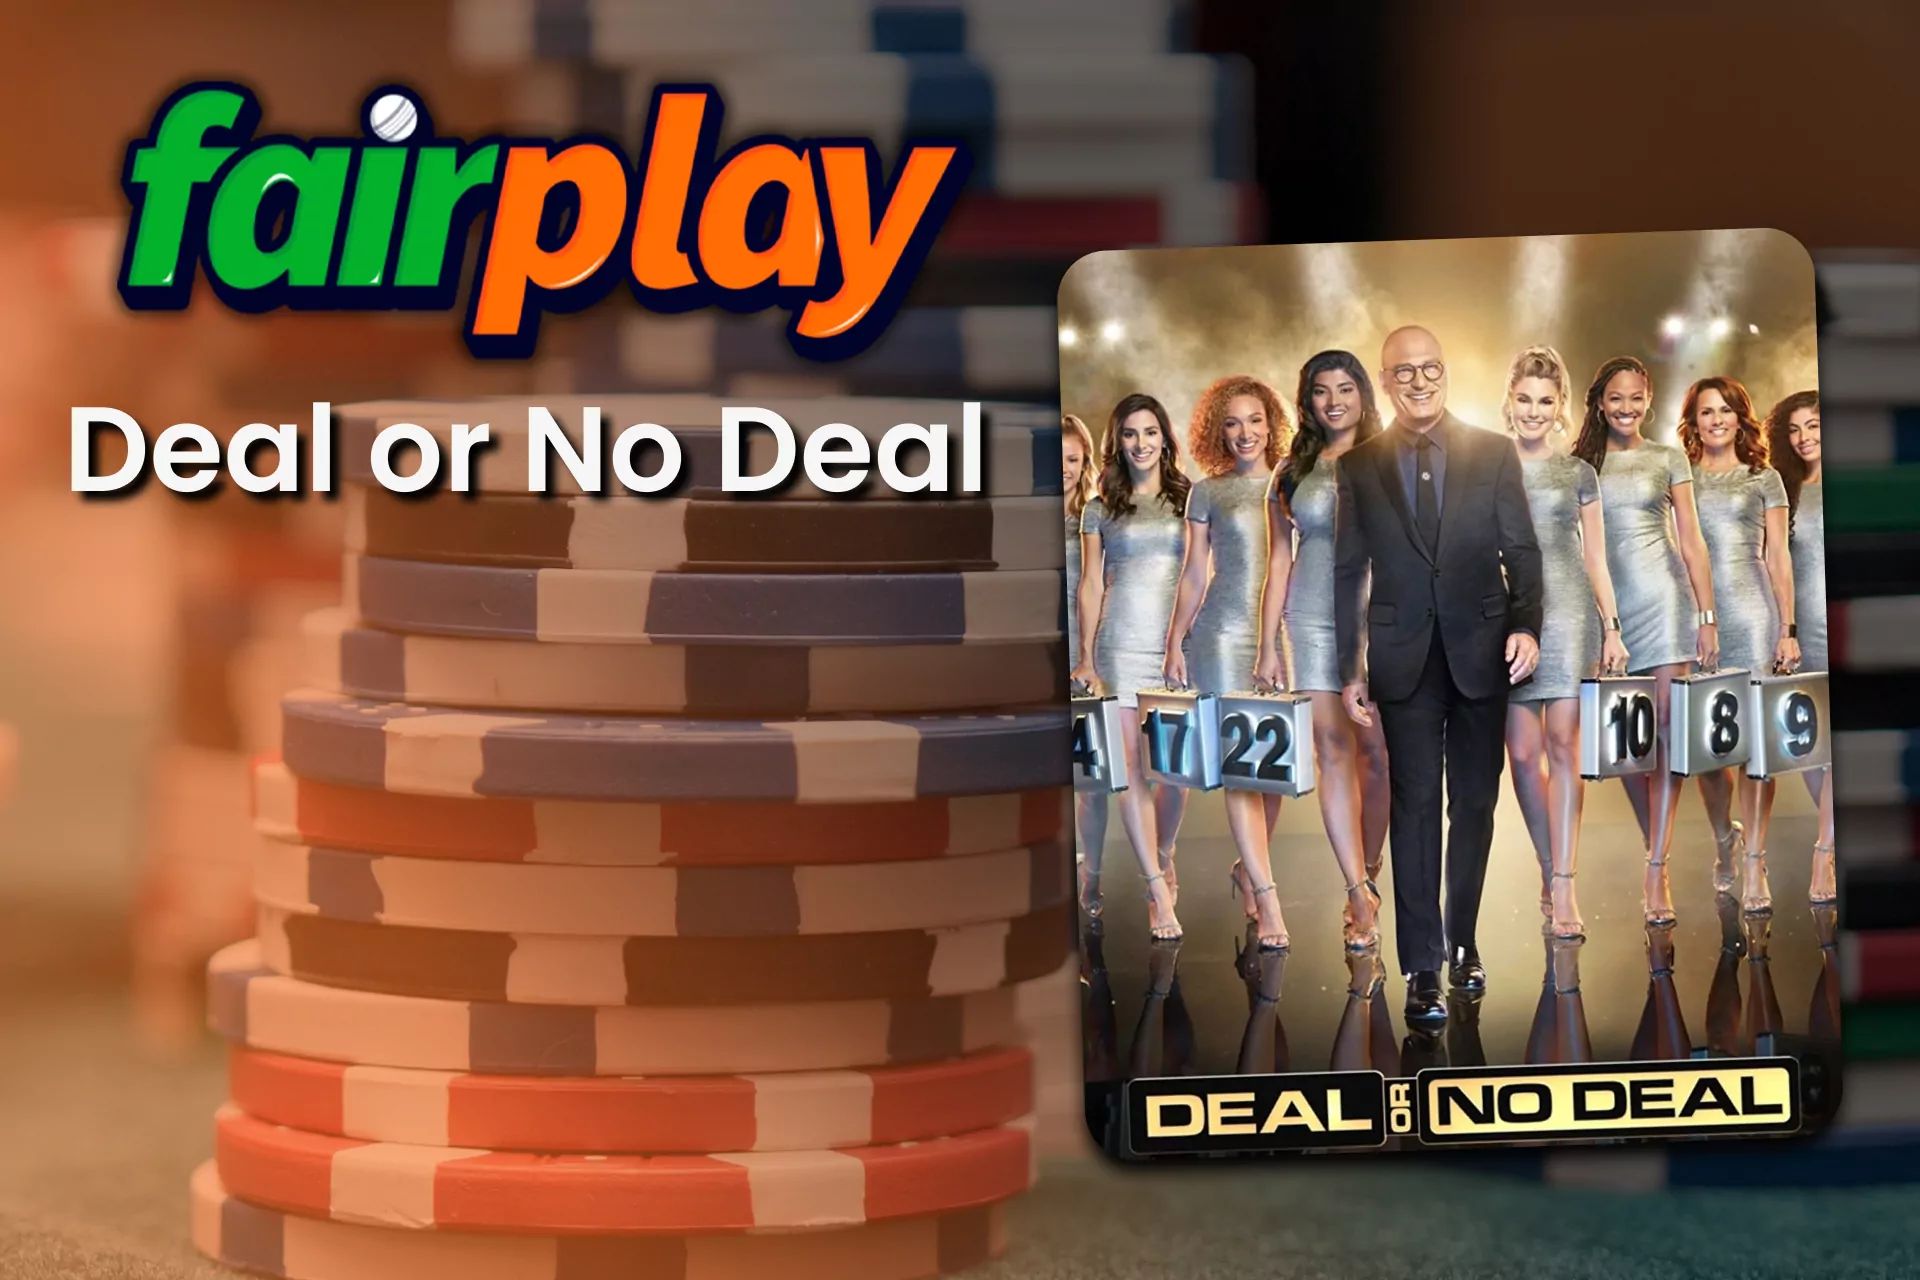 Play Dael or No Deal on Fairplay.